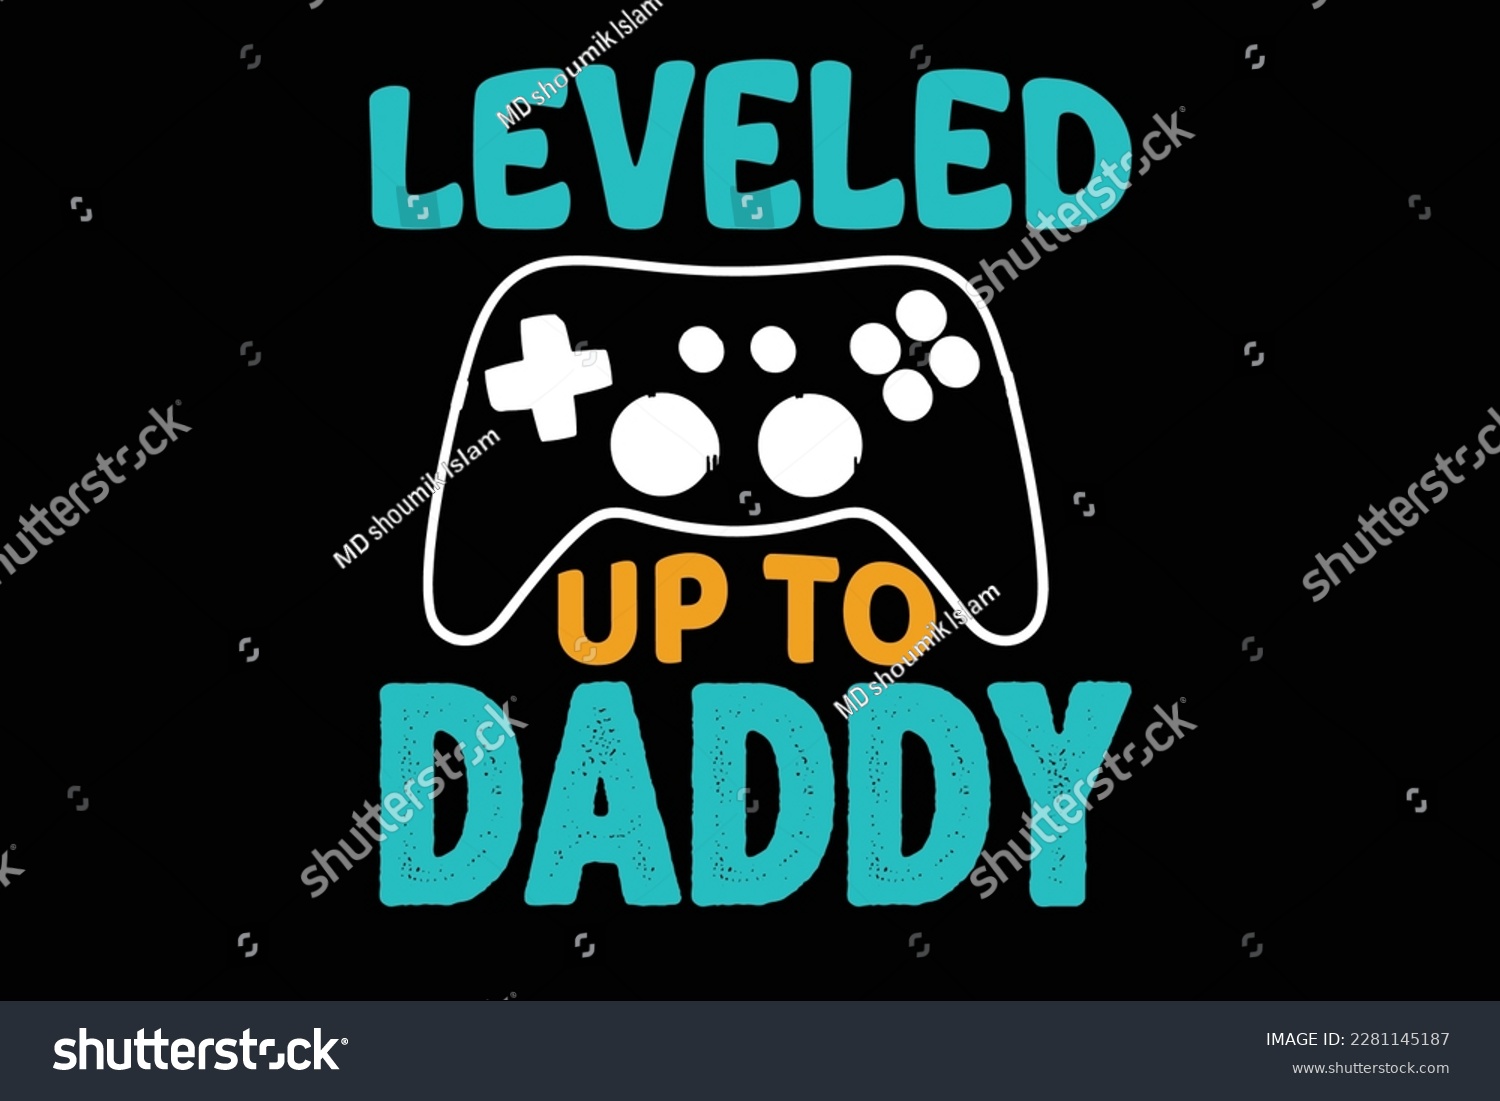 SVG of LEVELED UP TO DADDY t shirt design svg